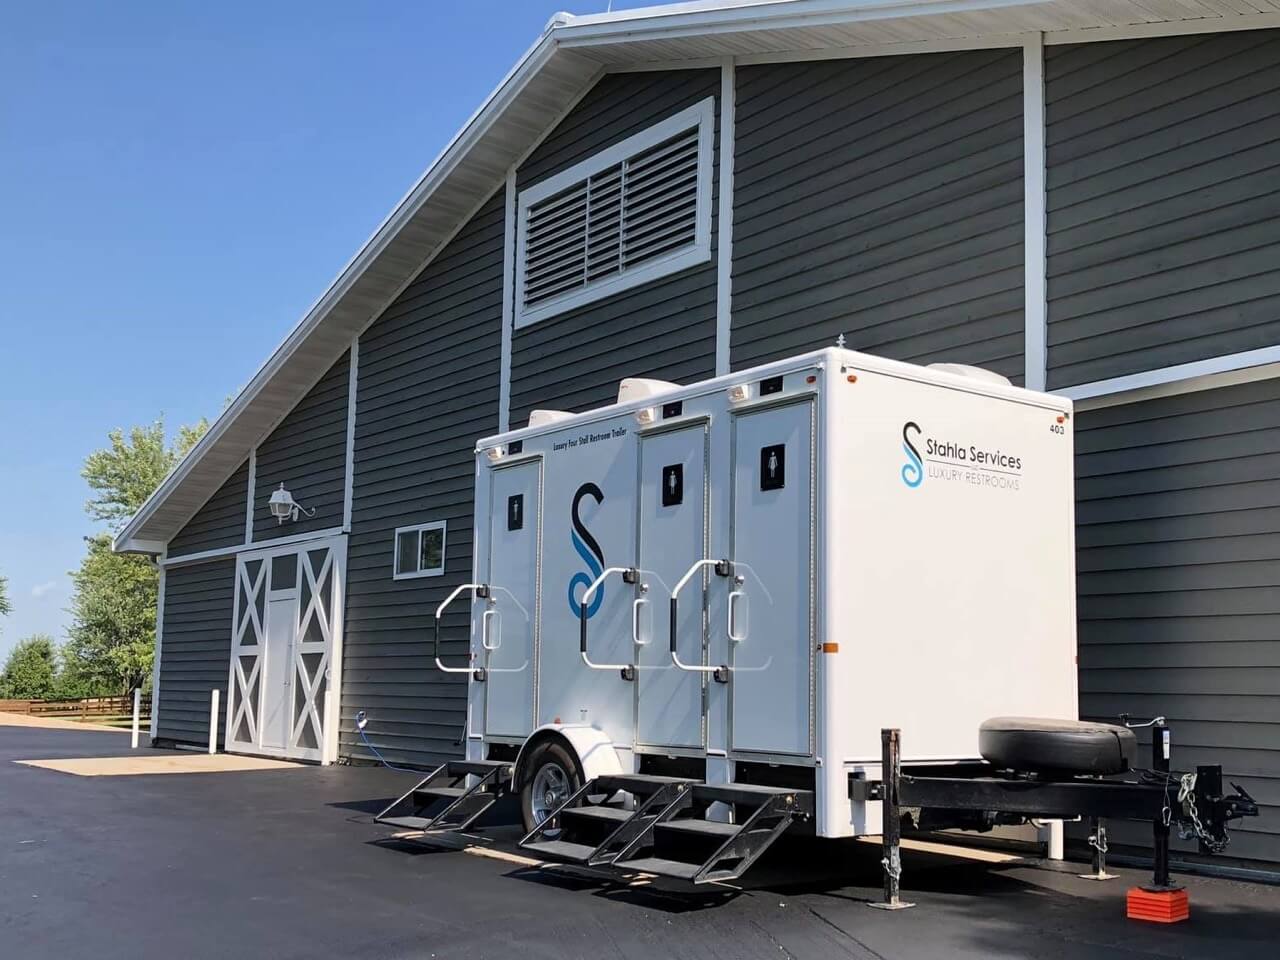 a 4 stall restroom trailer from stahla services is parked outside a large gray barn with white trim. the trailer features stairs and railings leading to three doors, offering convenient restroom access with a touch of elegance.